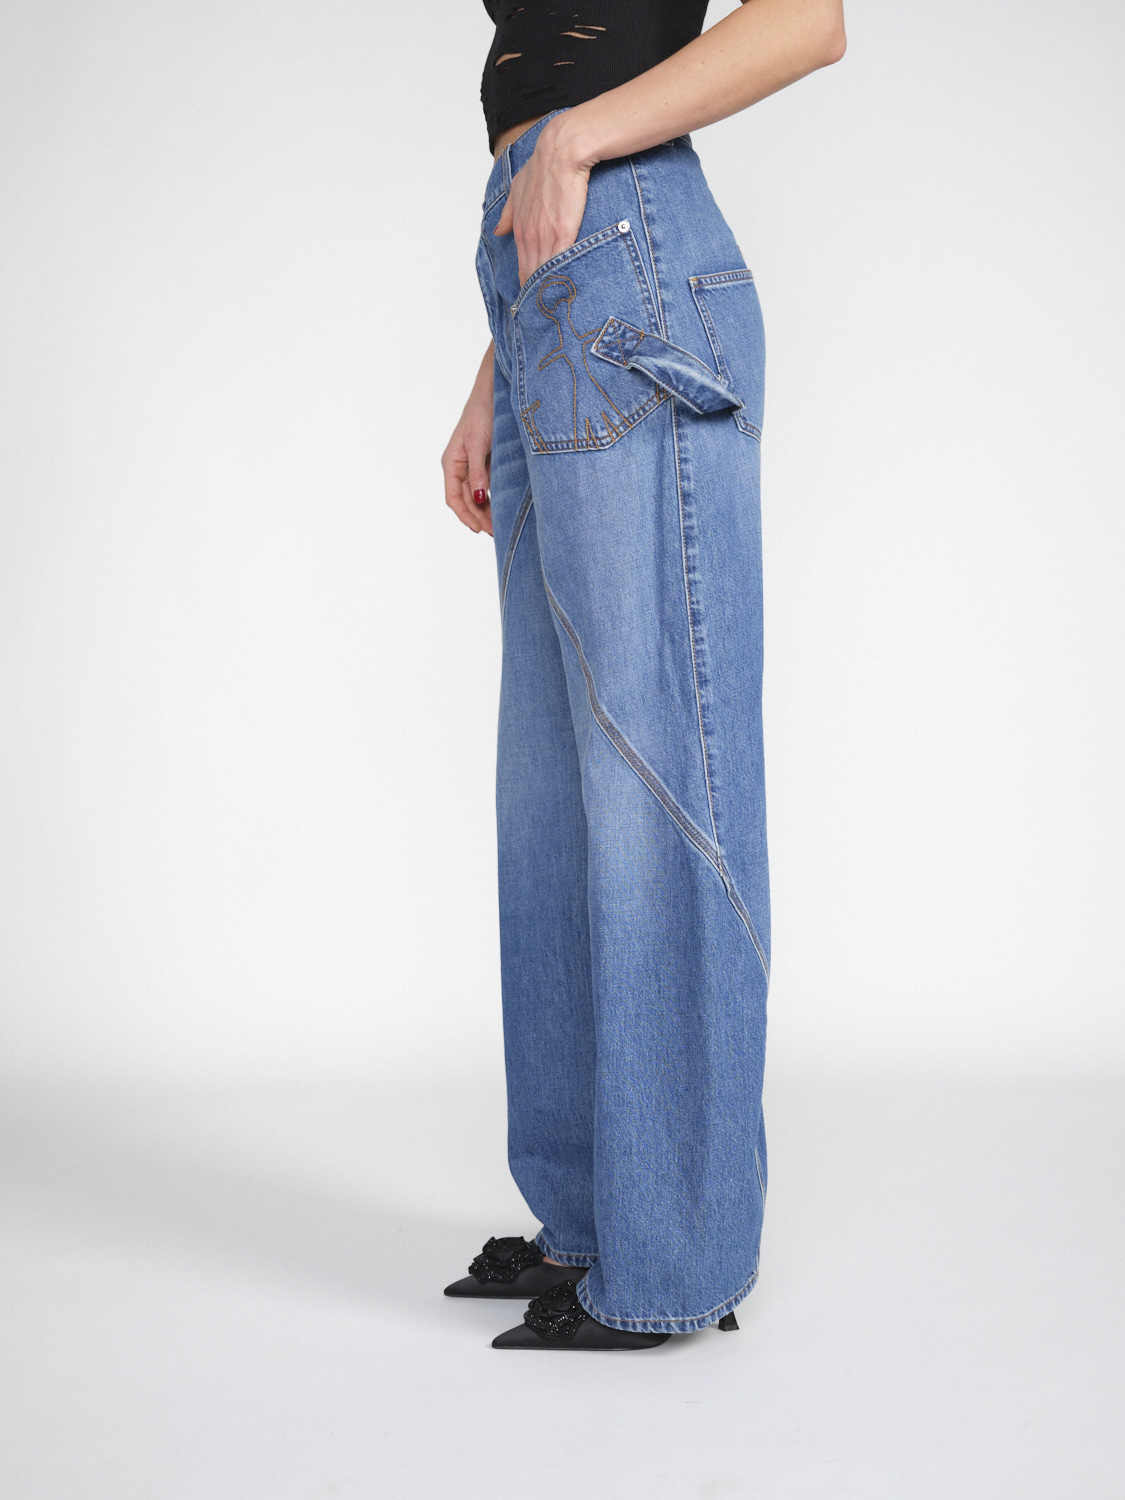 JW Anderson Worker-style blue jeans in rugged cotton  blue 26